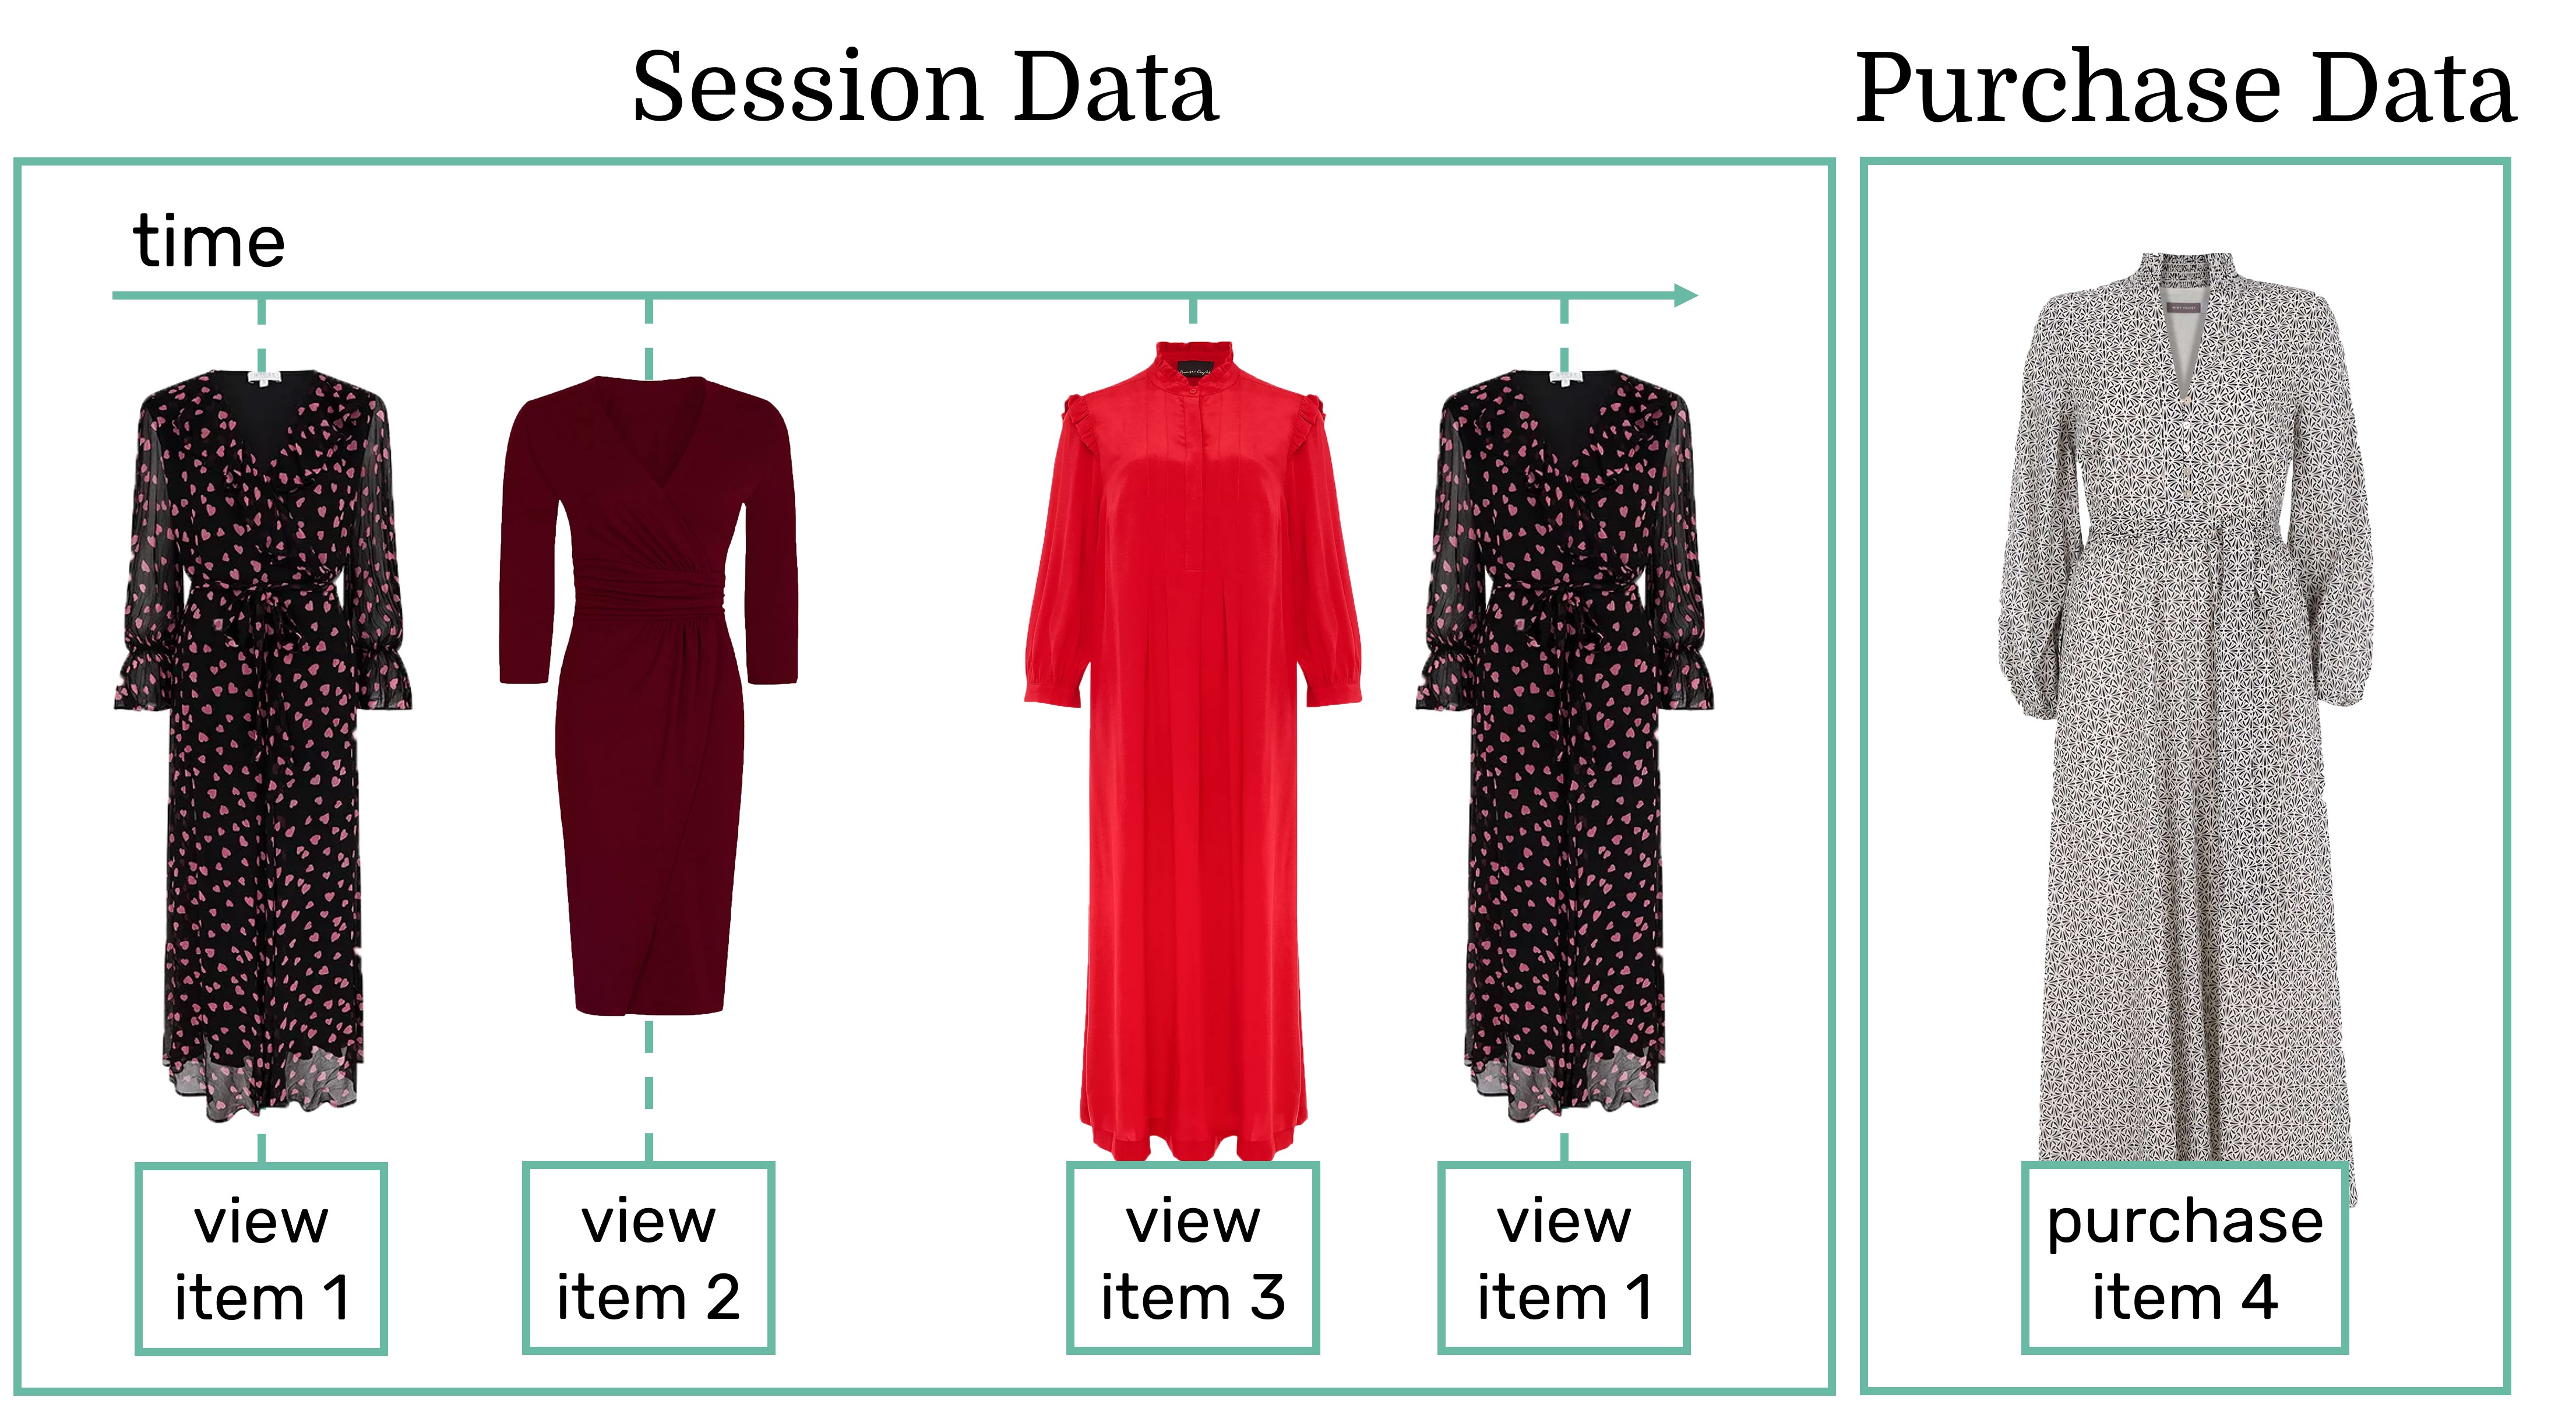 Demonstration of session and purchase data gathered from visitors